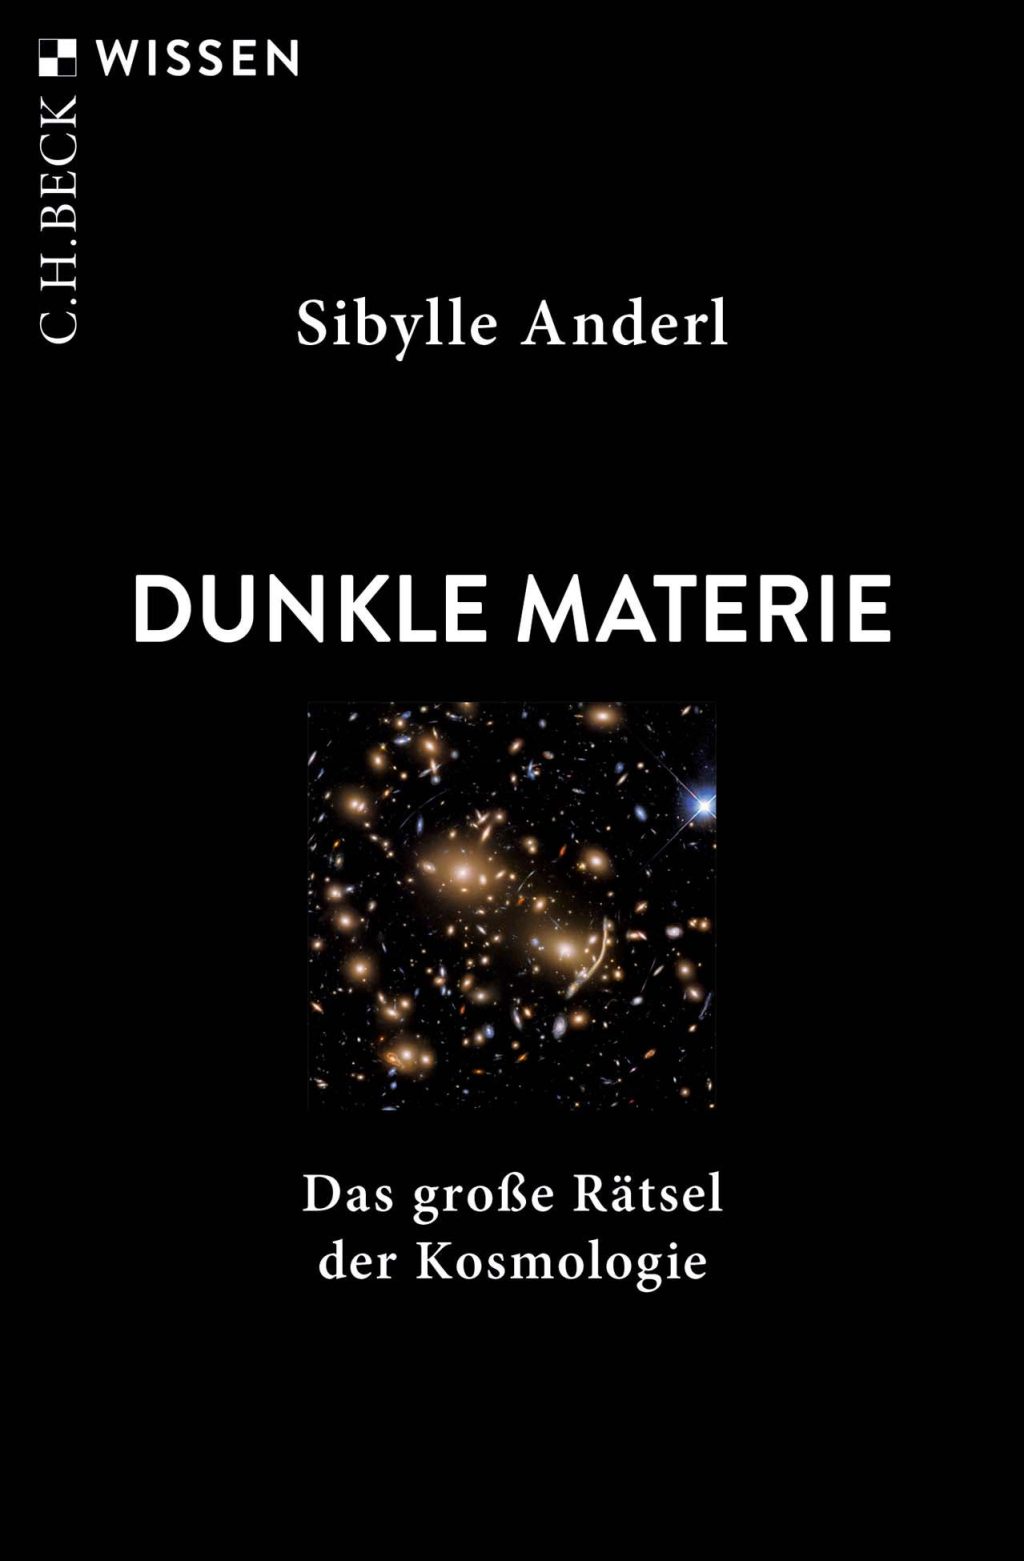 Review of the book "Dark Matter" - Spectrum of Science